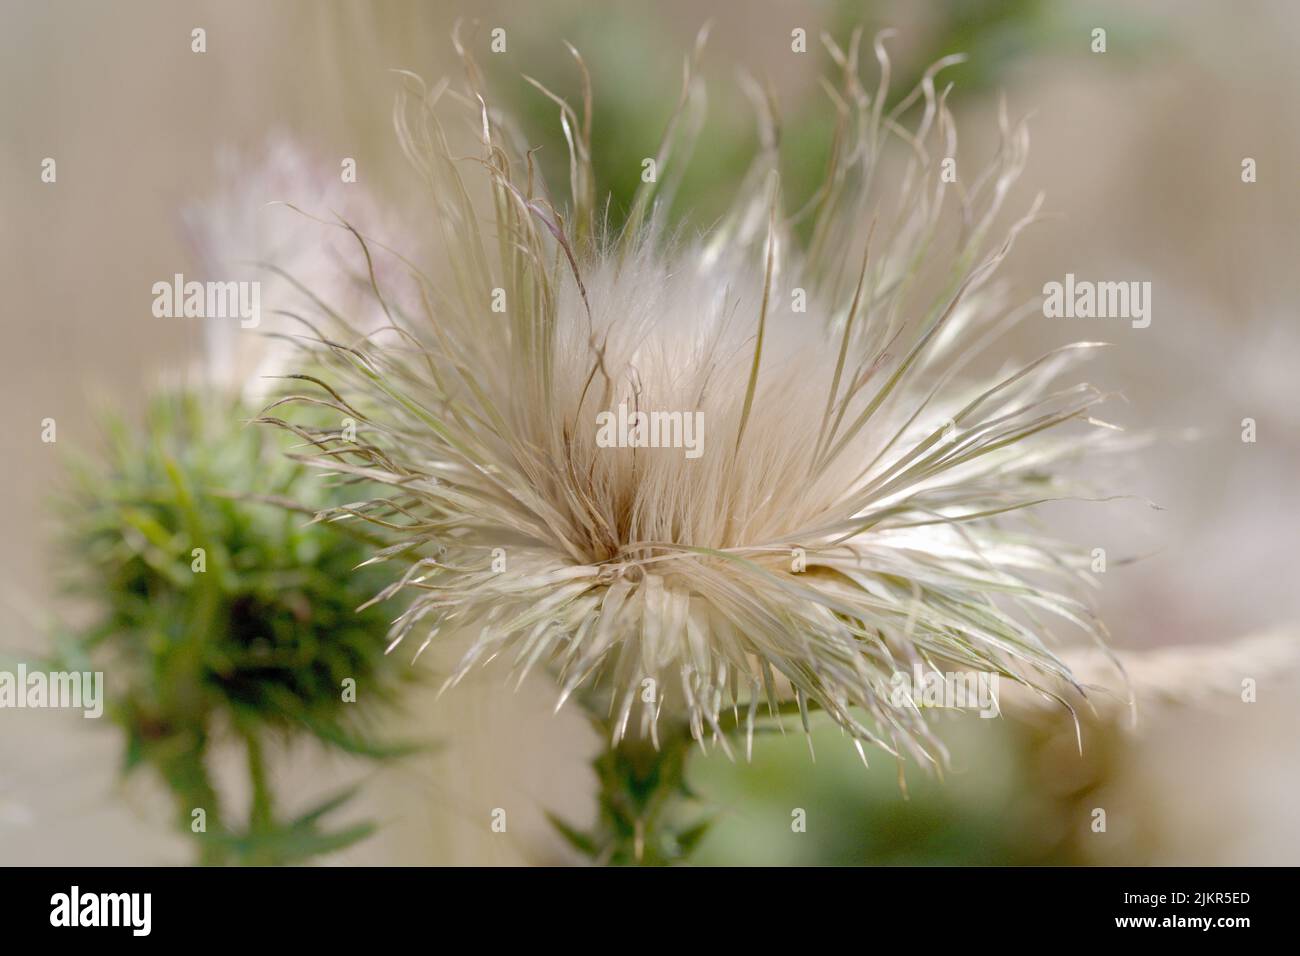 Macro photography of a thistle blossom Stock Photo